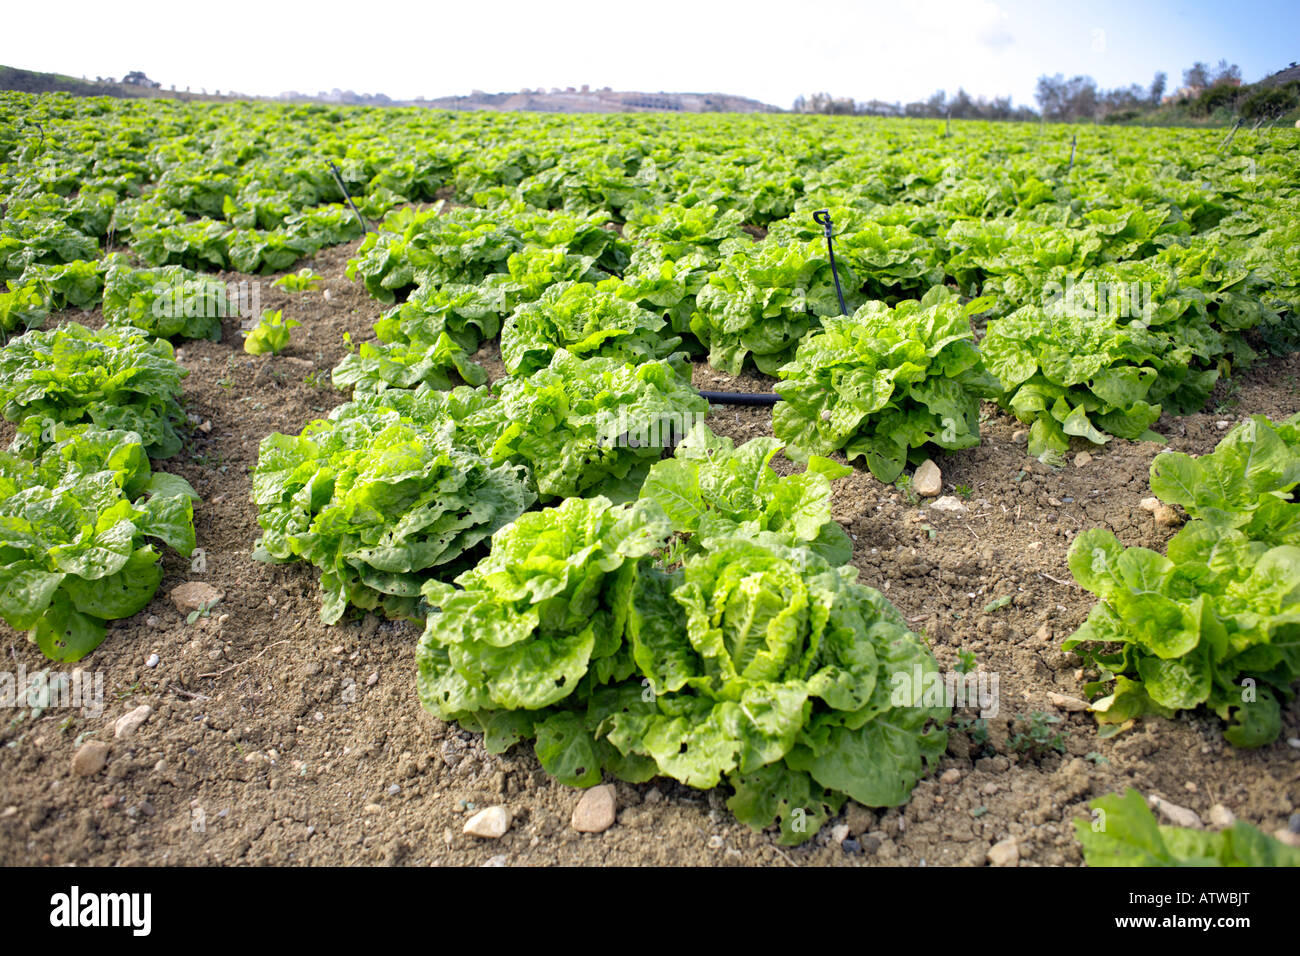 Field of Lettuces showing slug and snail damage, Alhaurin El Grande, Valle de Guadalhorce, Malaga Province, Spain, Early March Stock Photo